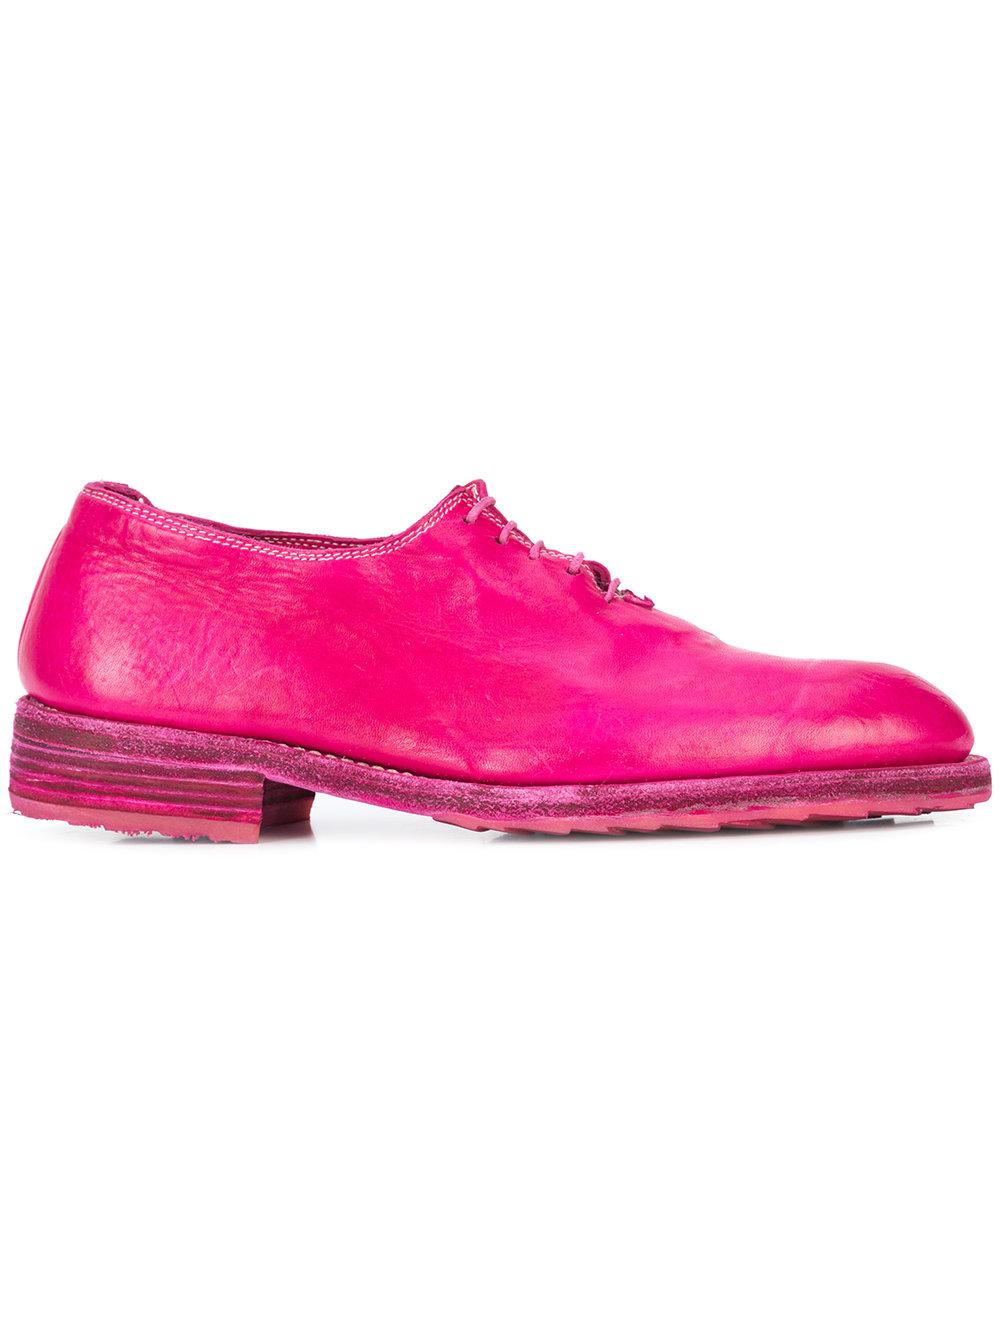 Guidi Lace-Up Oxford Shoes - Pink | ModeSens